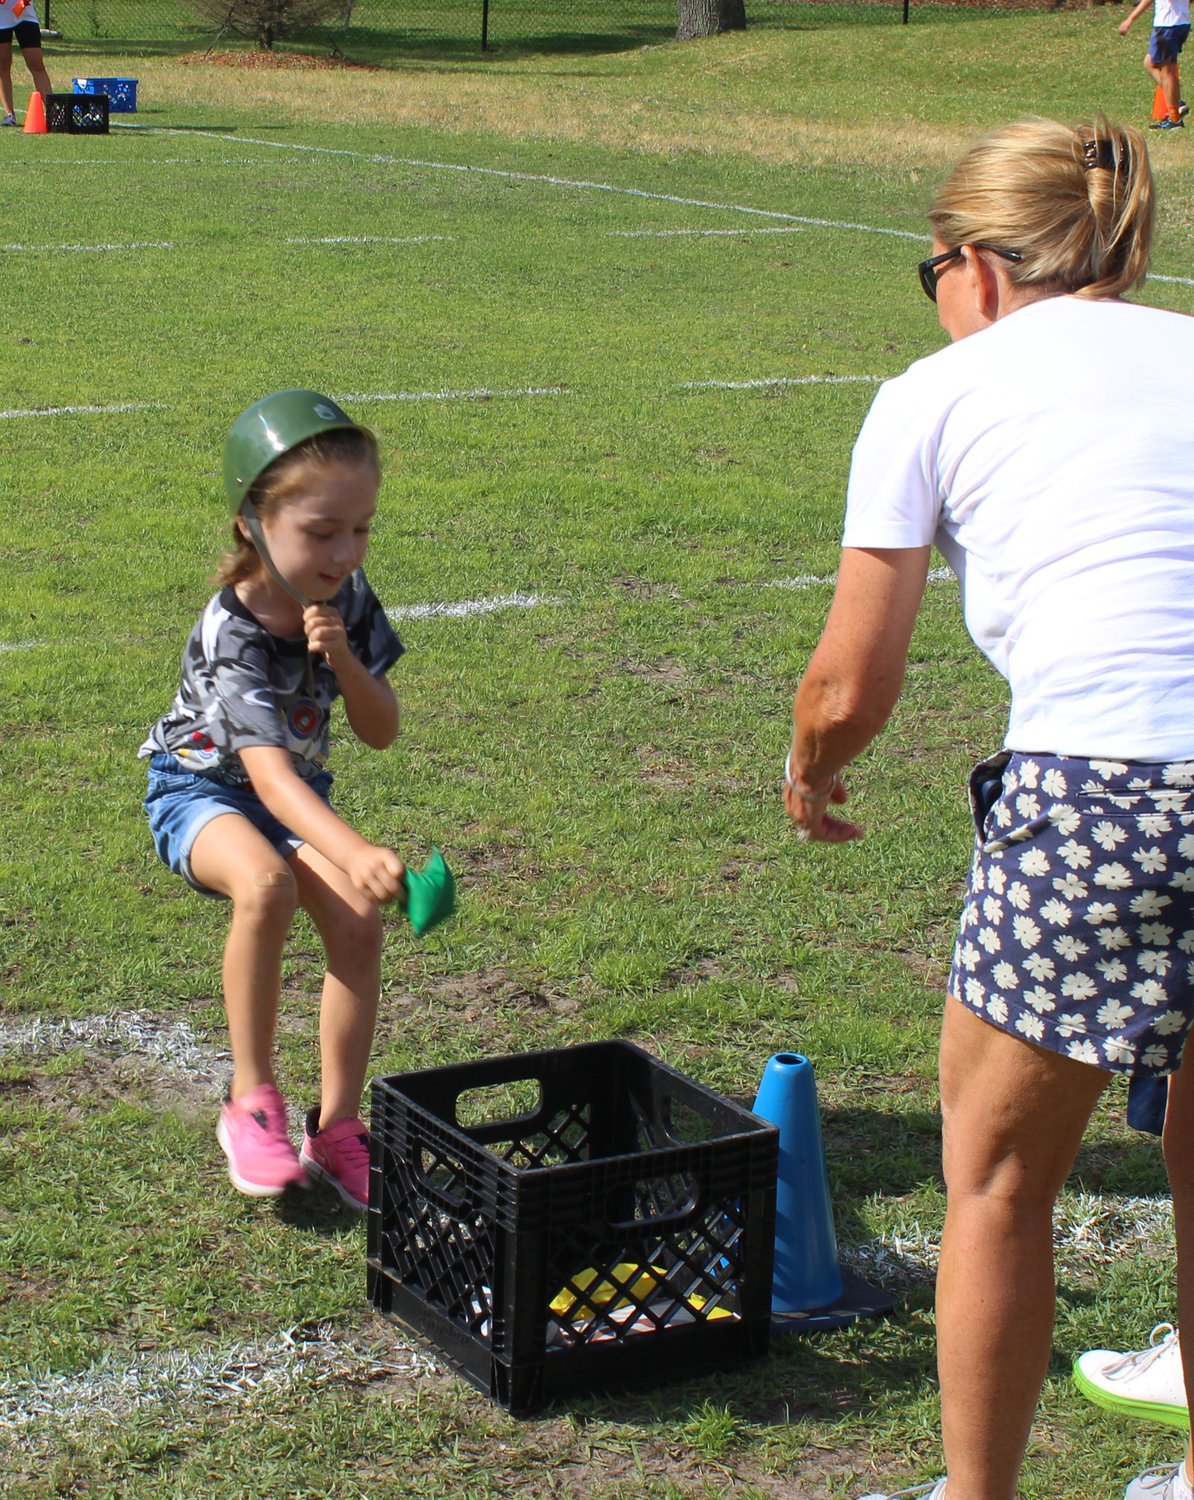 A Bolles student drops a bean bag into a receptacle during a military-themed relay race.